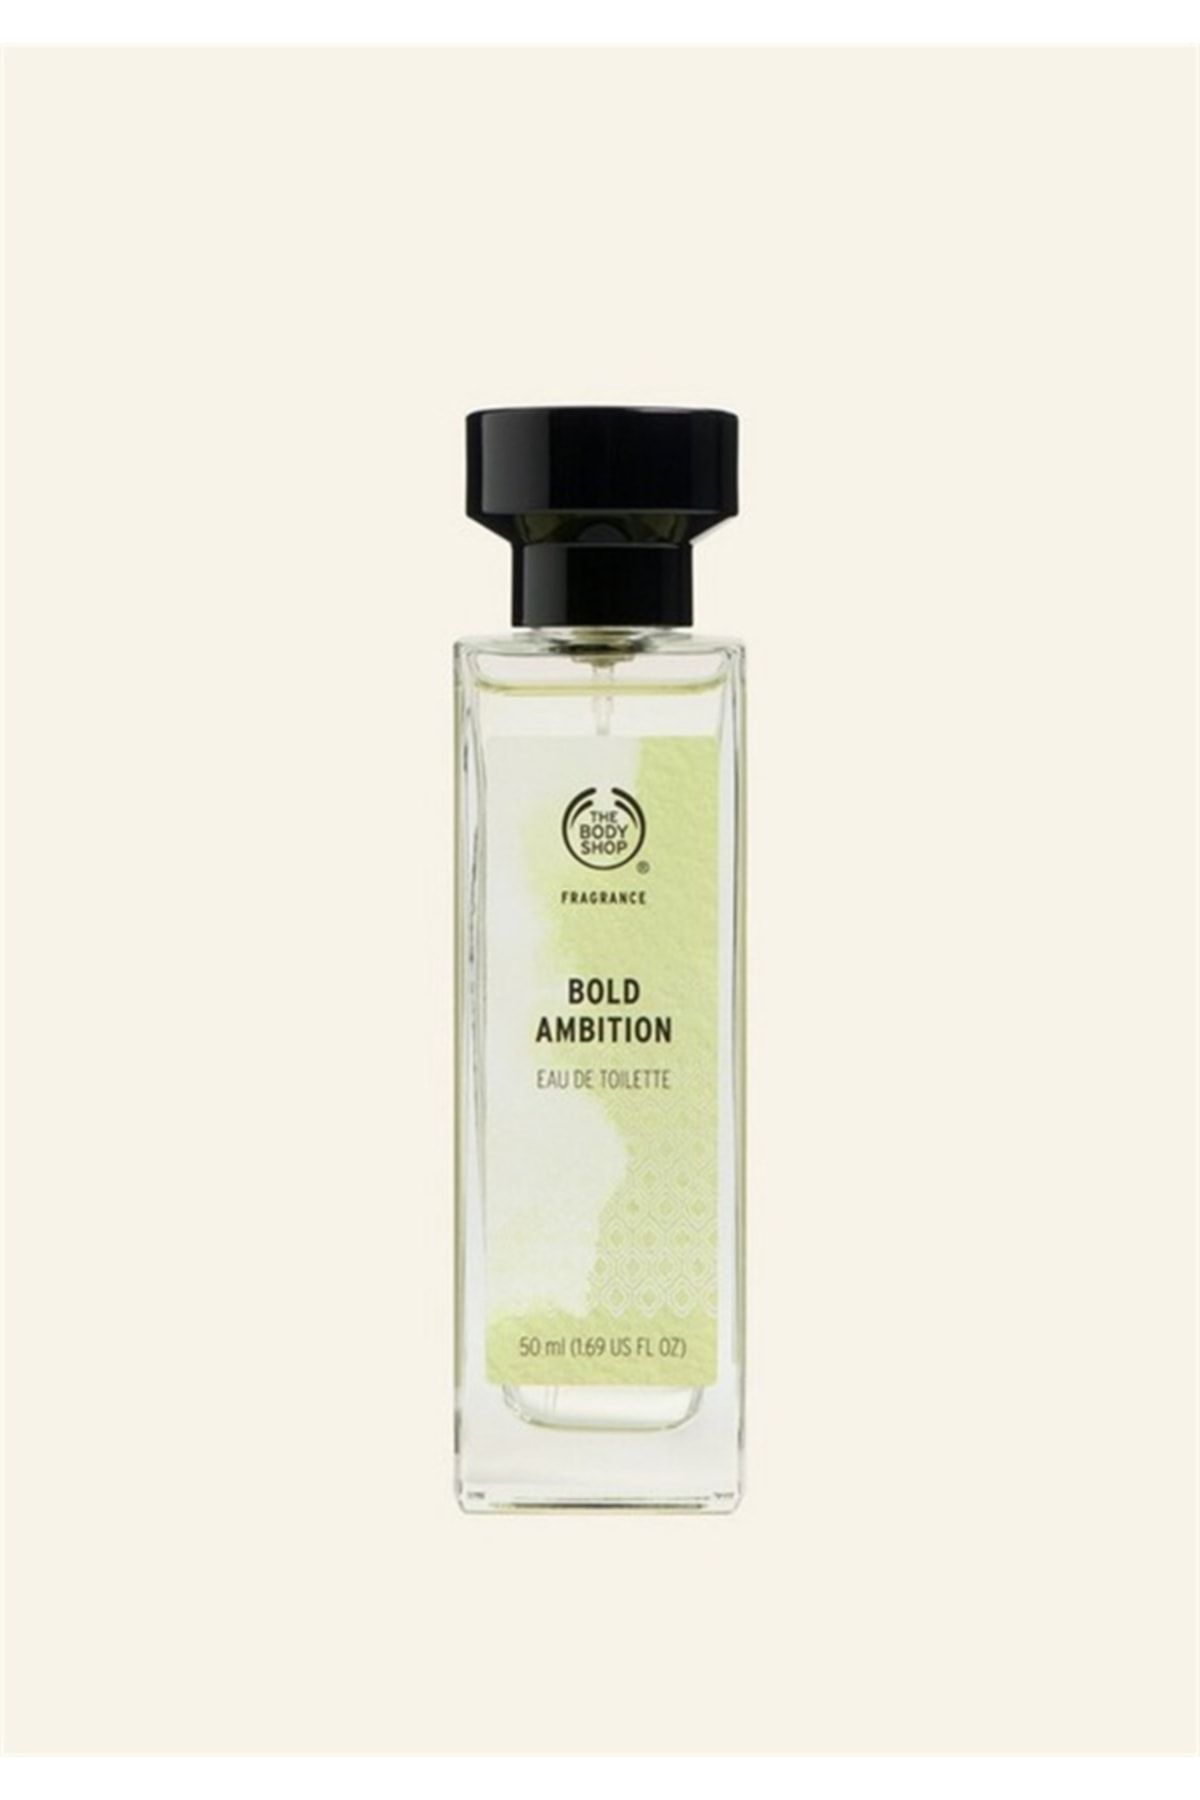 THE BODY SHOP ادو تویلت Bold Ambition